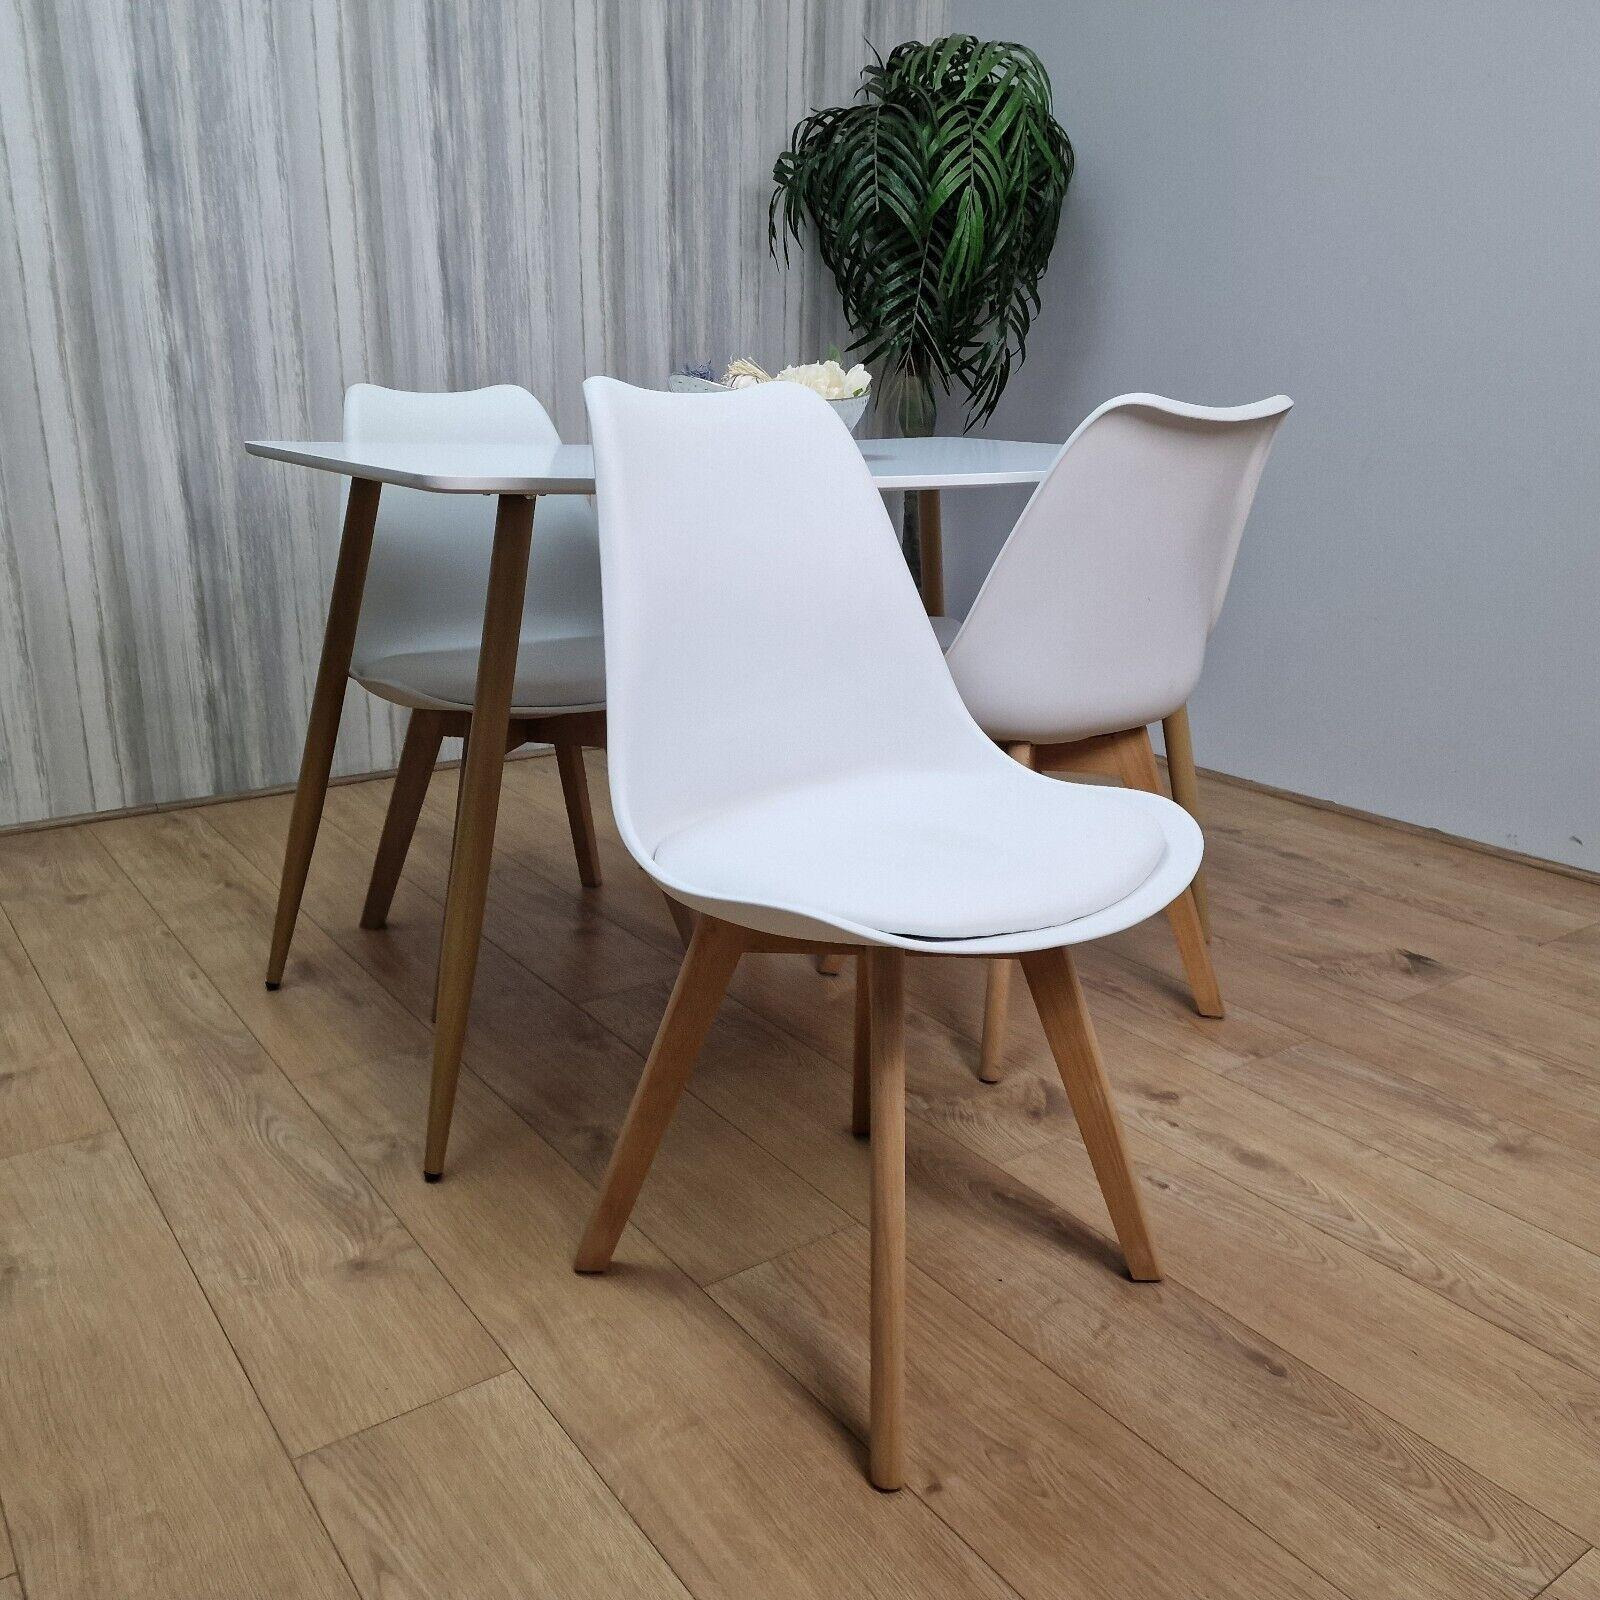 Dining Table Set with 4 Chairs Dining Room and Kitchen table set of 4 - image 1